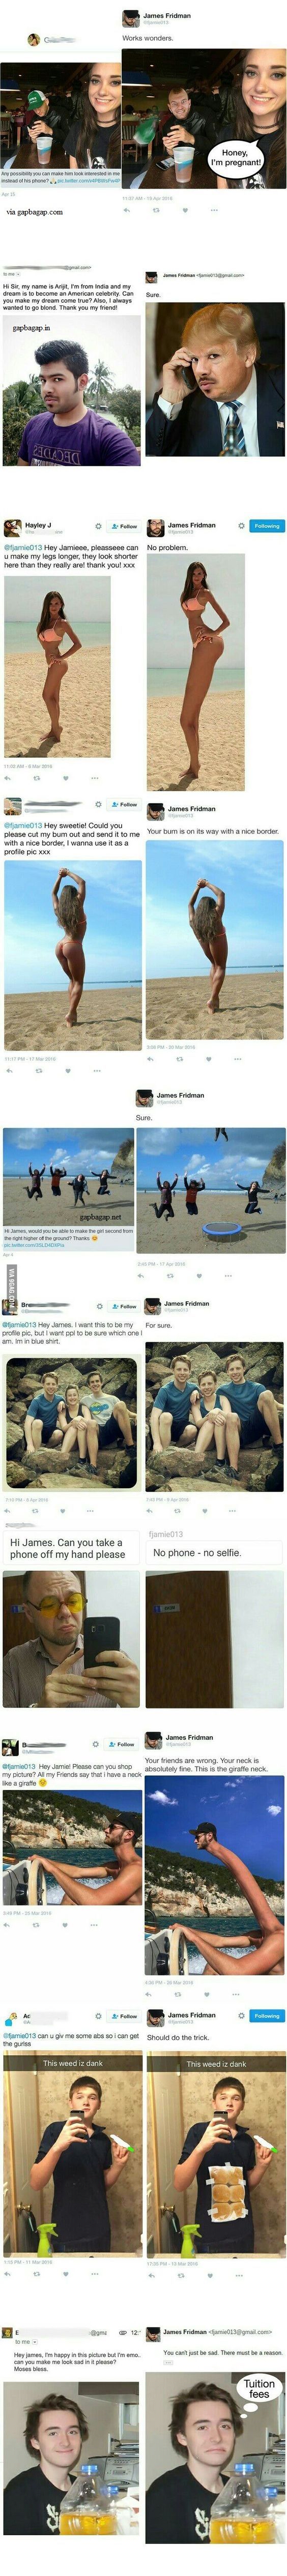 Top 10 Funny Photoshop By James Fridman